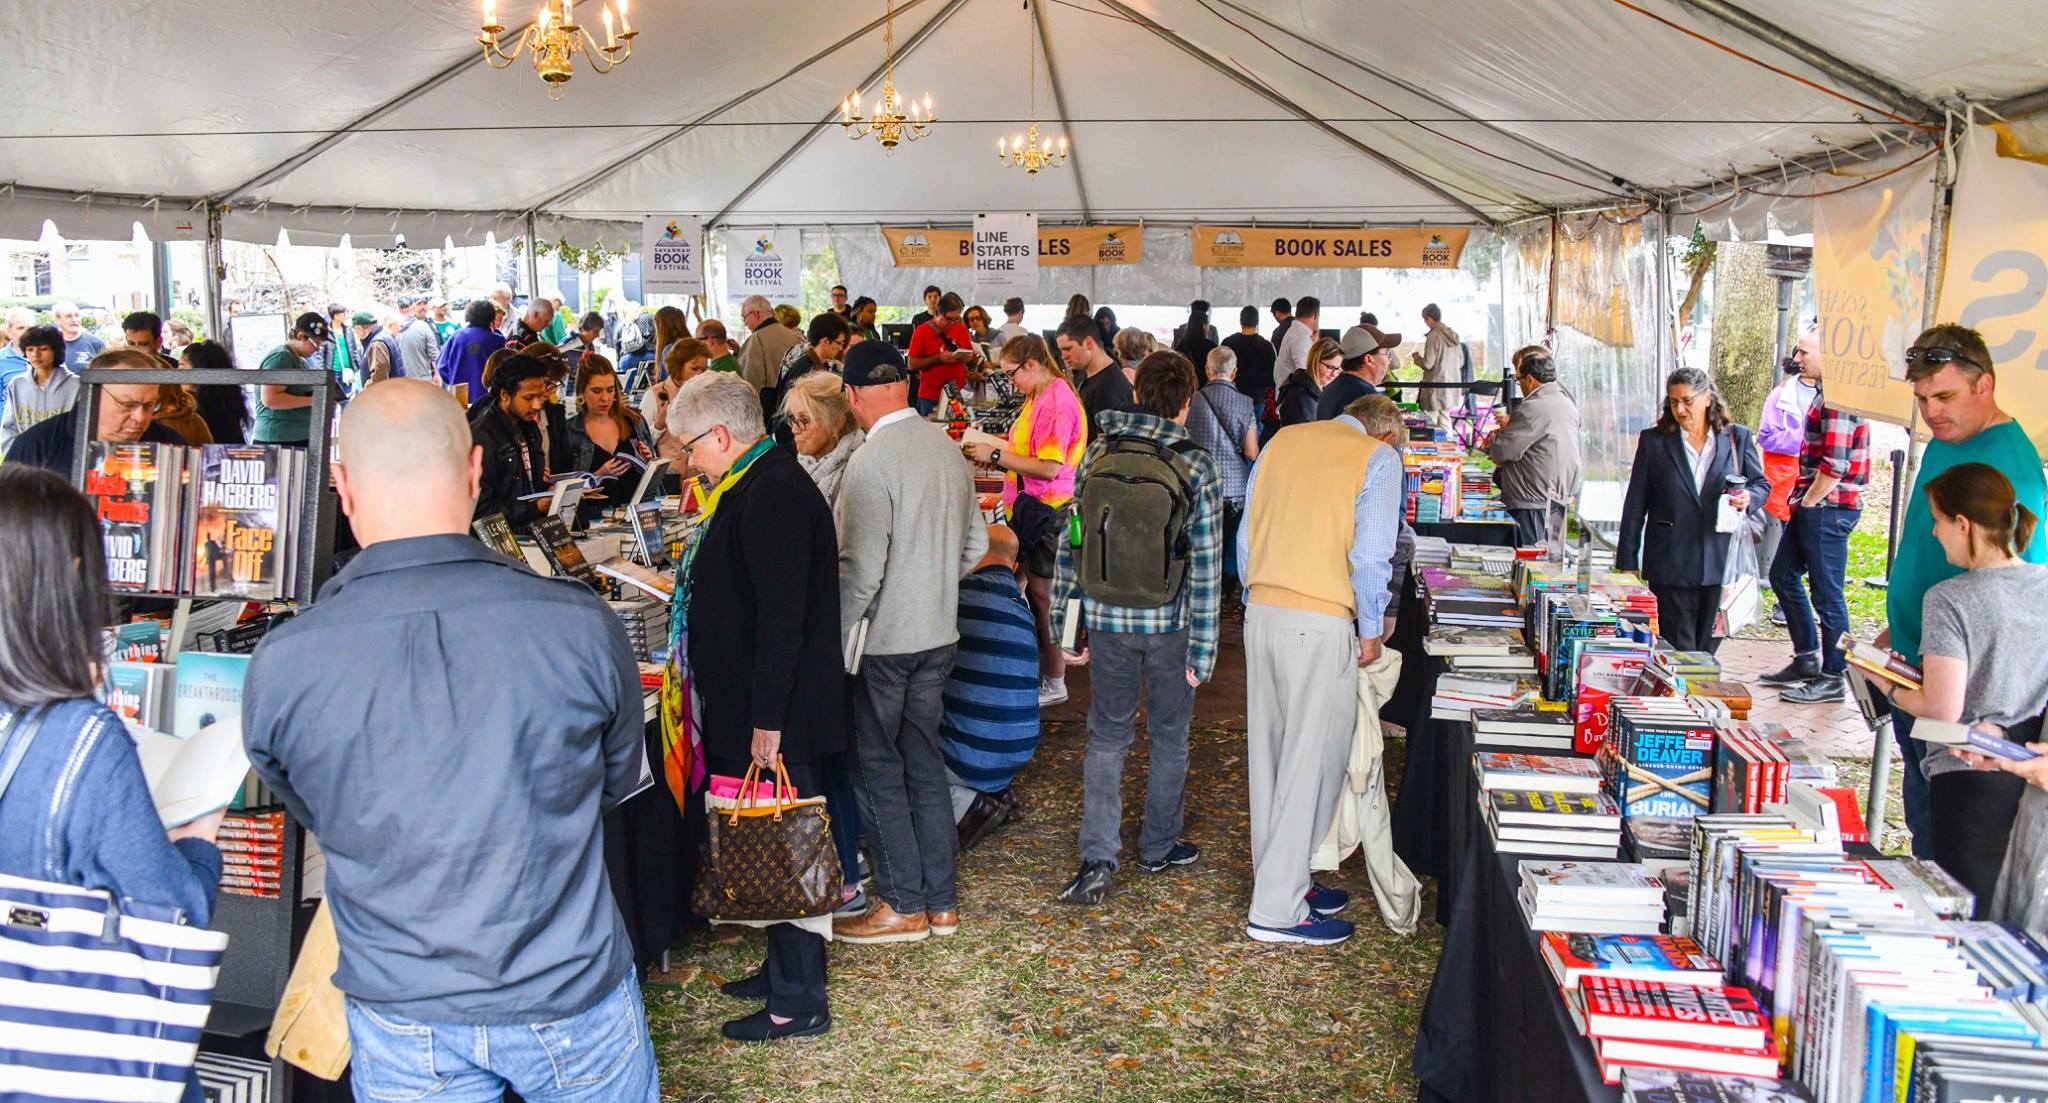 The Savannah Book Festival will be held in locations in and aroun